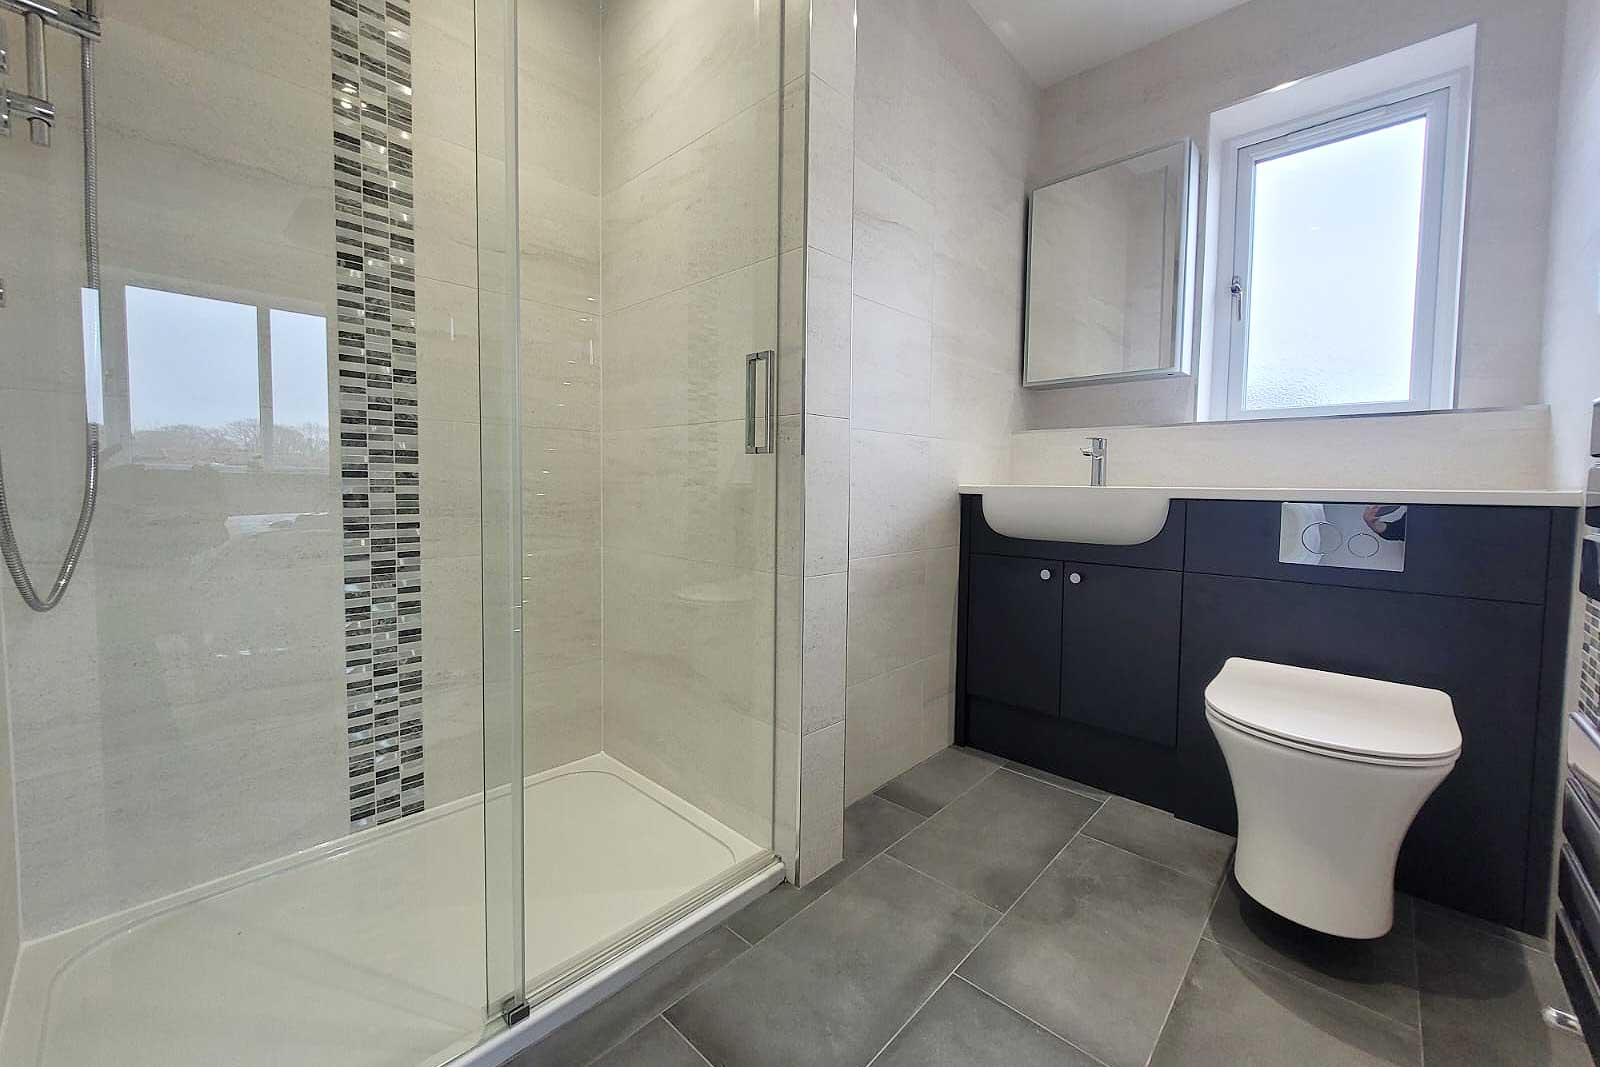 Refurbished and enlarged ensuite bathroom by Room H2o for a customer in Lytchett Matravers in Dorset